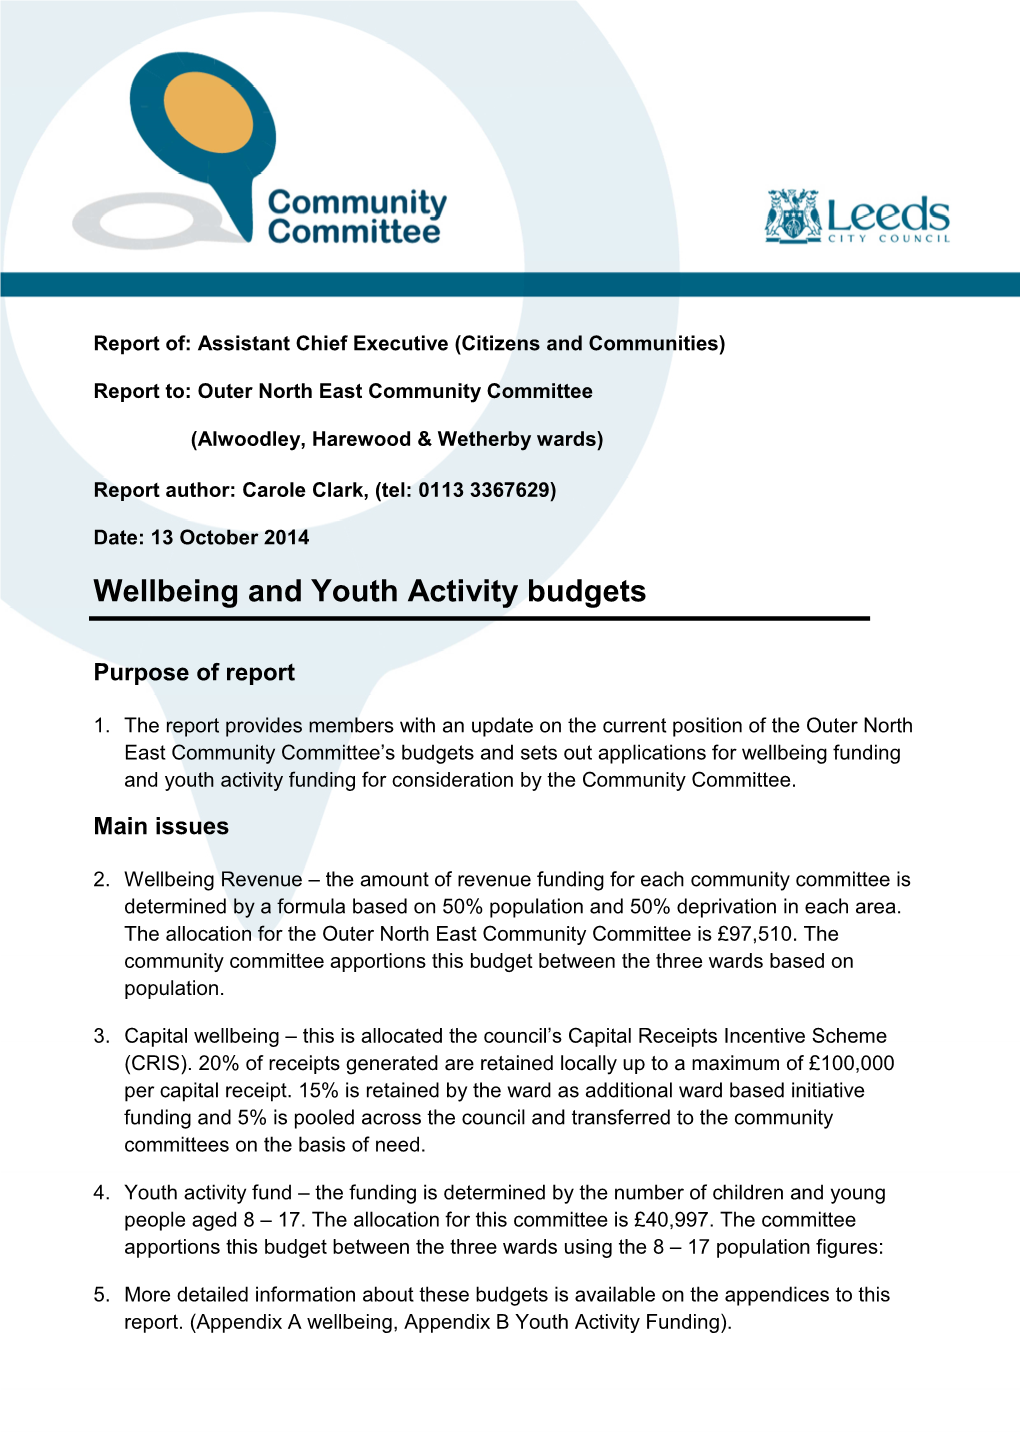 Wellbeing and Youth Activity Budgets